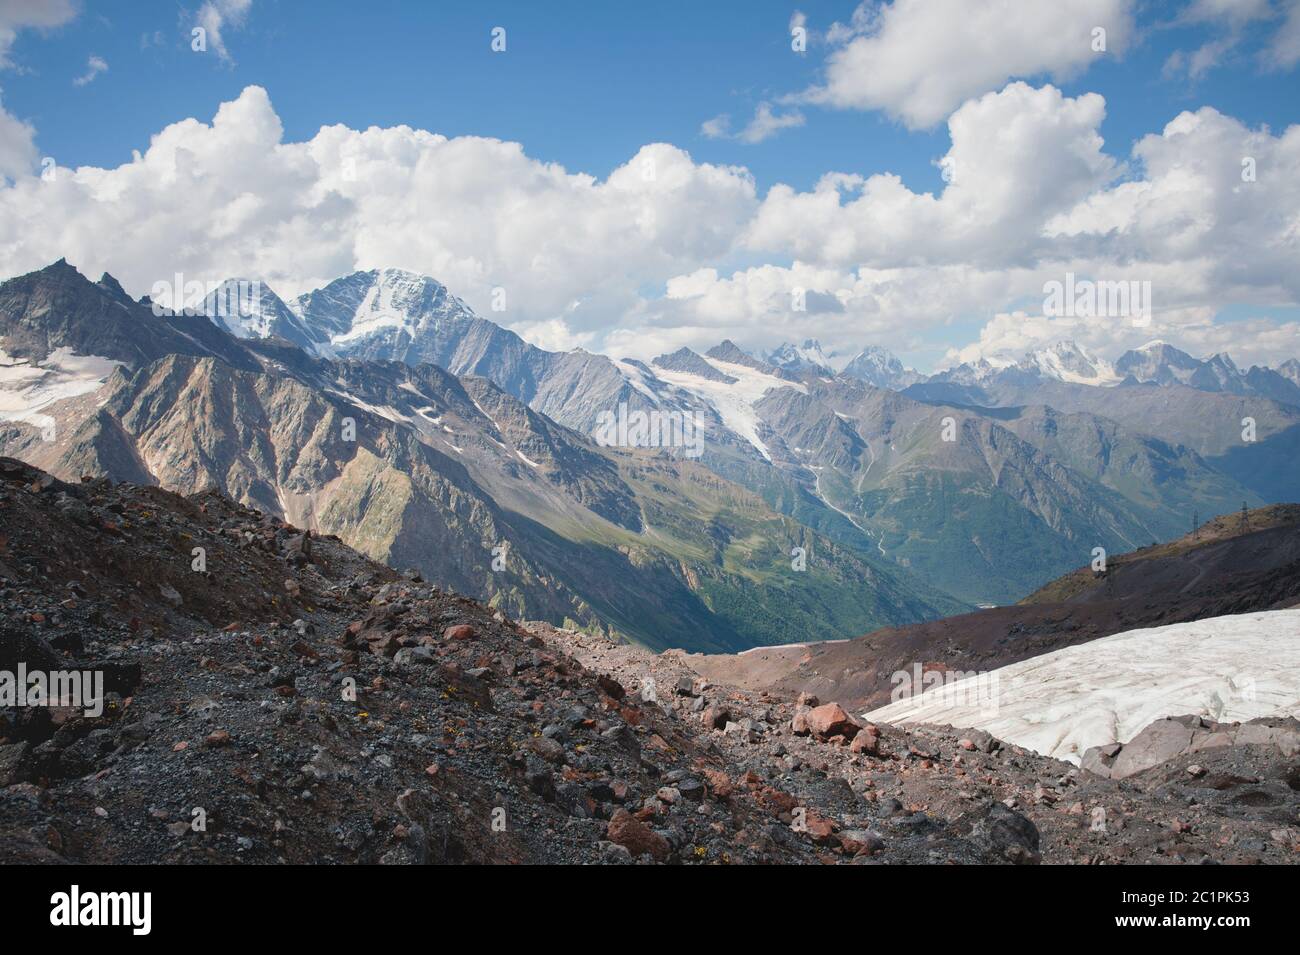 Mountain landscape dusty dirty volcanic slope with a cracked melting glacier against the backdrop of the Caucasus Mountains. Glo Stock Photo